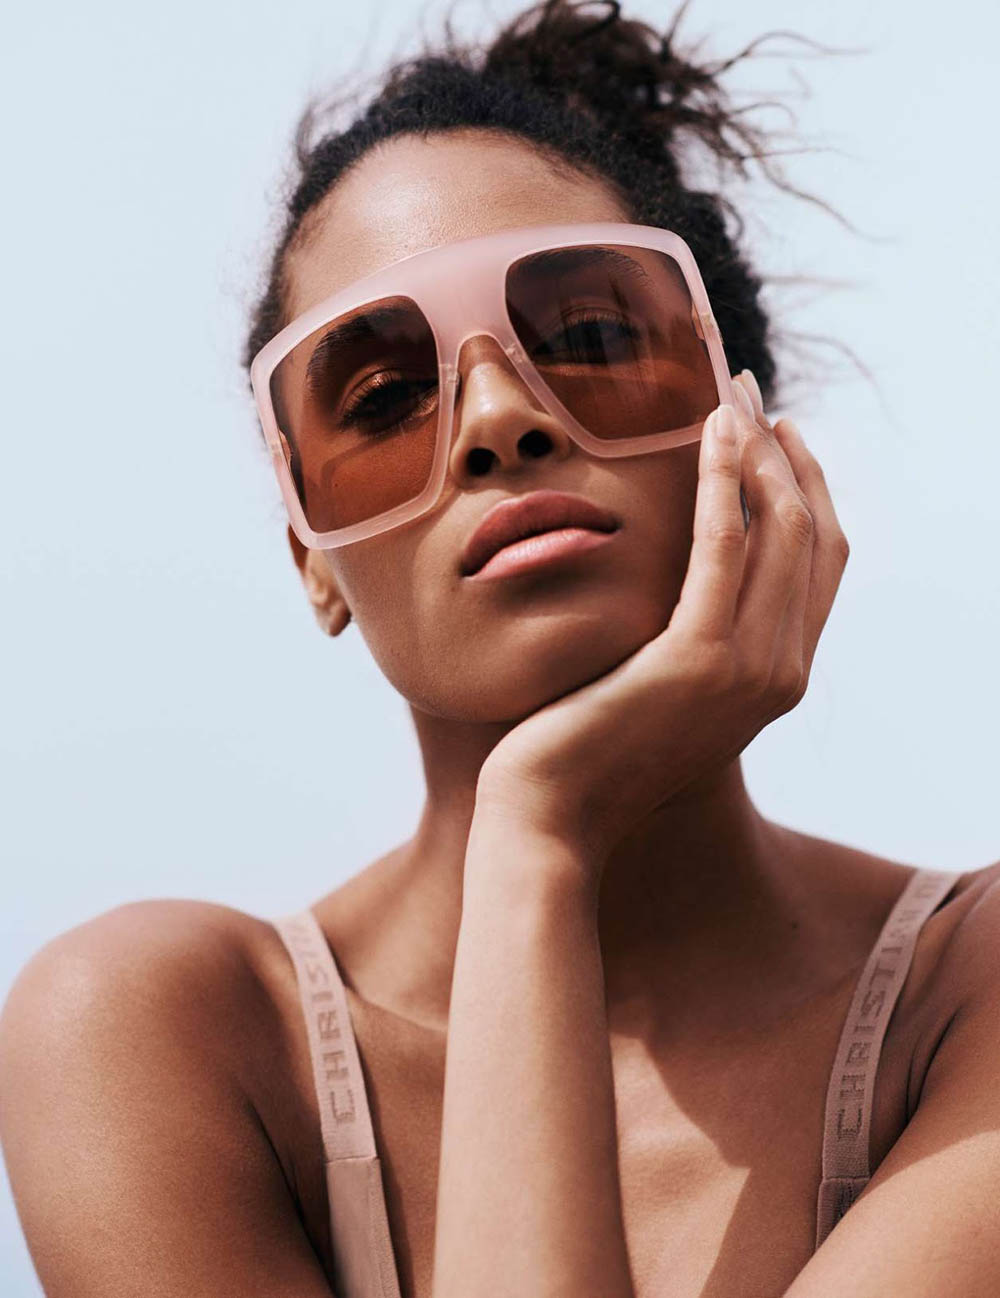 Cindy Bruna covers Elle France May 24th, 2019 by Jan Welters